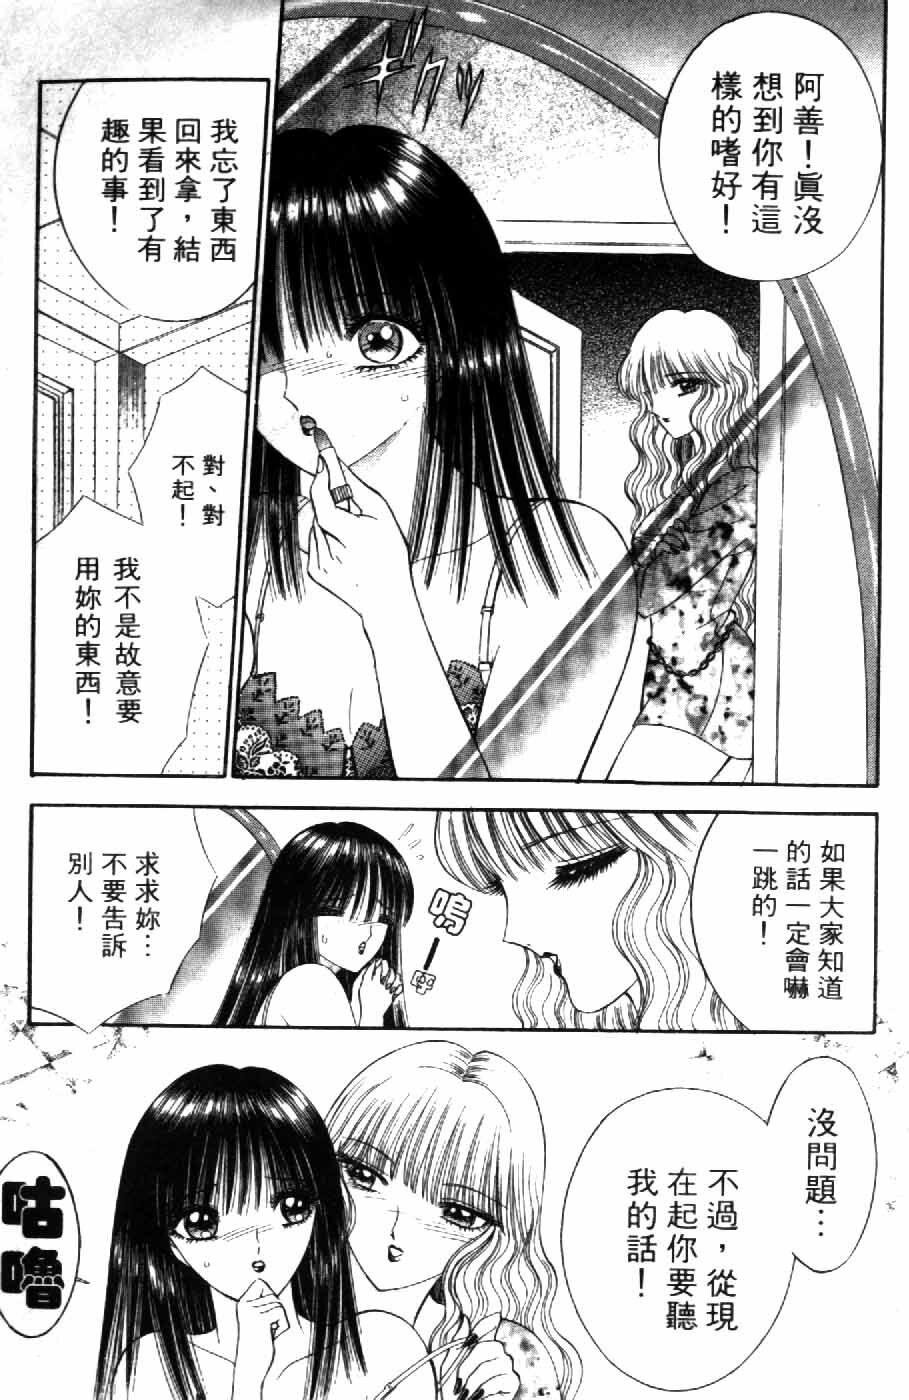 [Senno Knife] Ouma ga Horror Show 2 - Trans Sexual Special Show 2 | 顫慄博覽會 2 [Chinese] page 9 full